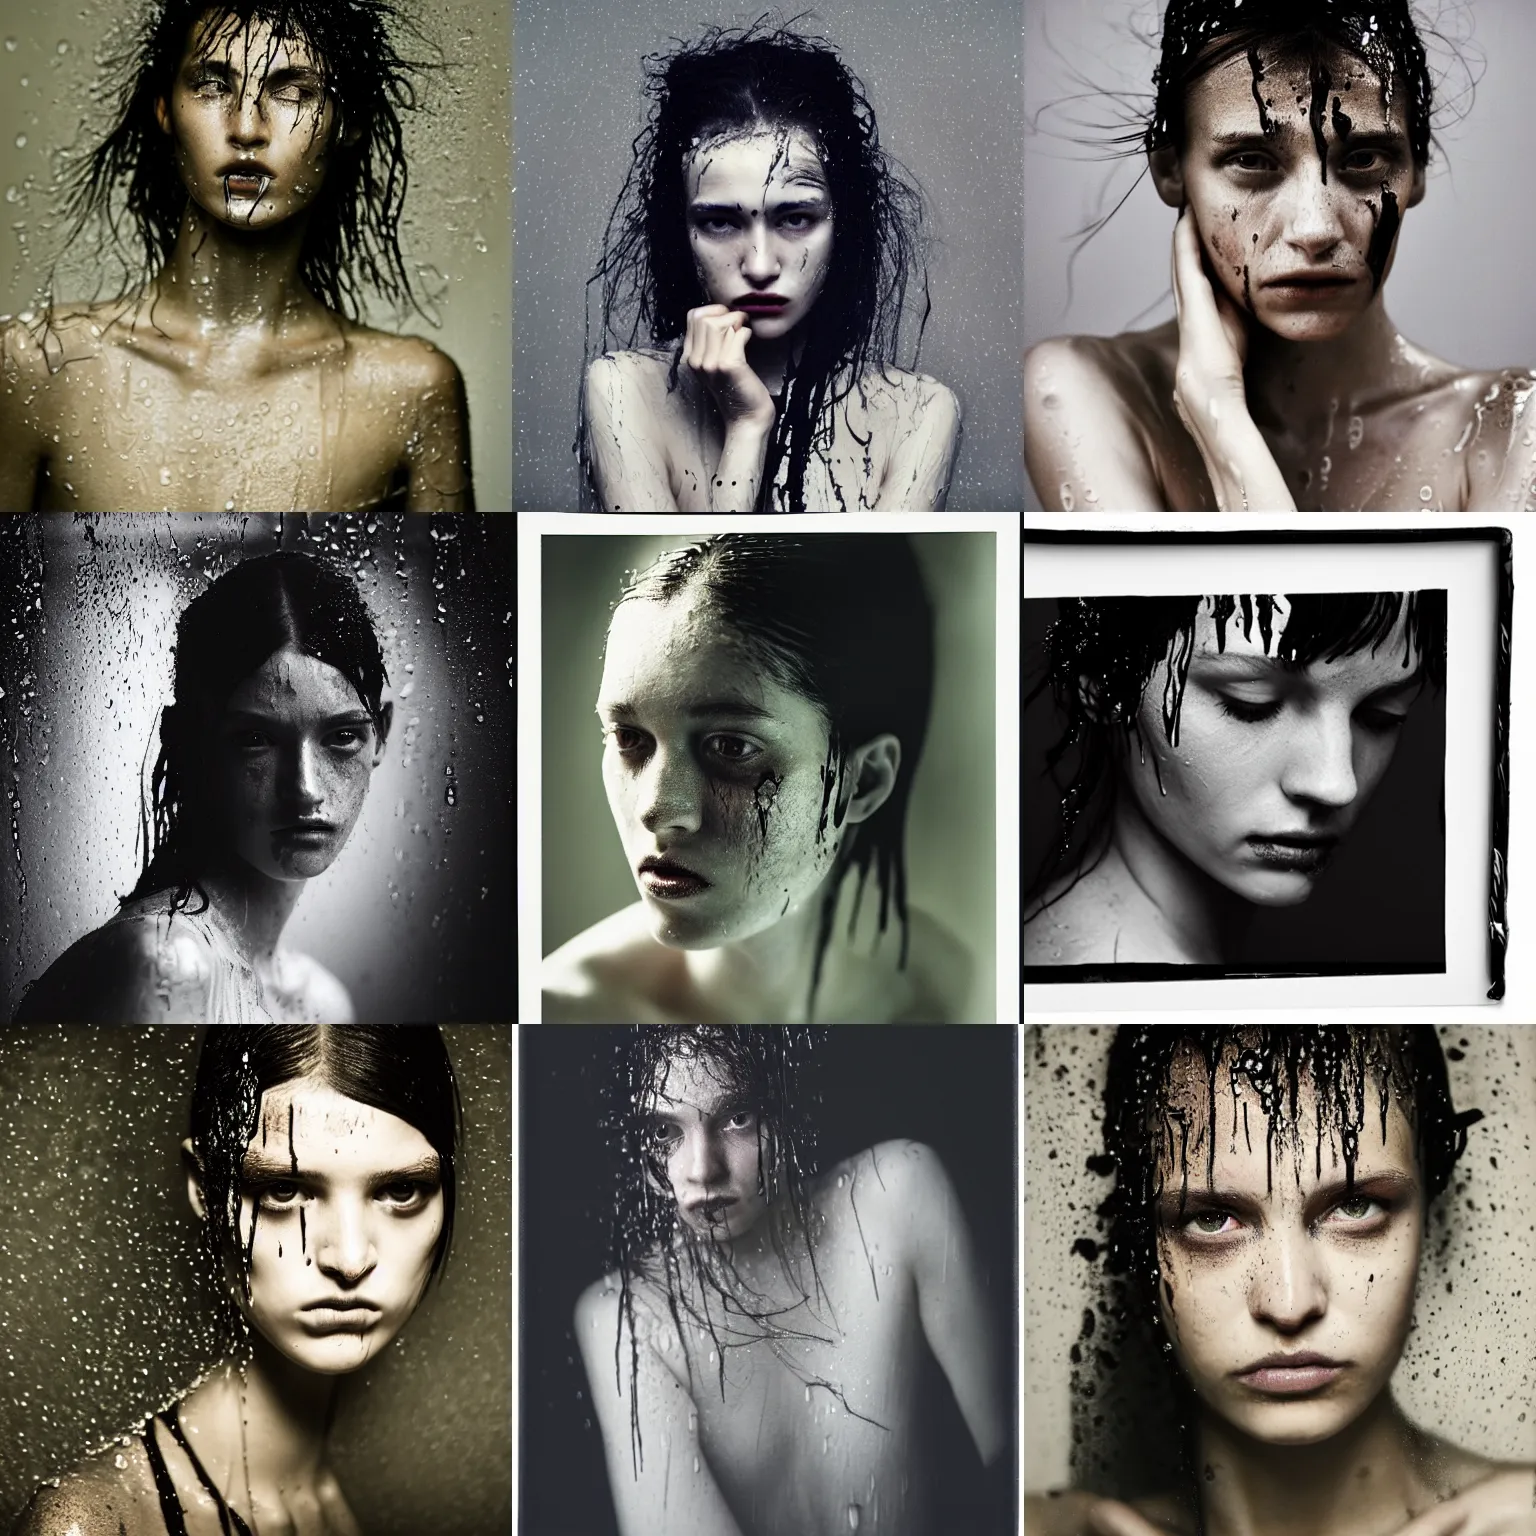 Prompt: a photo by paolo roversi of a young woman with mascara running down her cheek, wet in the rain, low - key lighting, backlit, dark, soaked white clothing, hasselblad